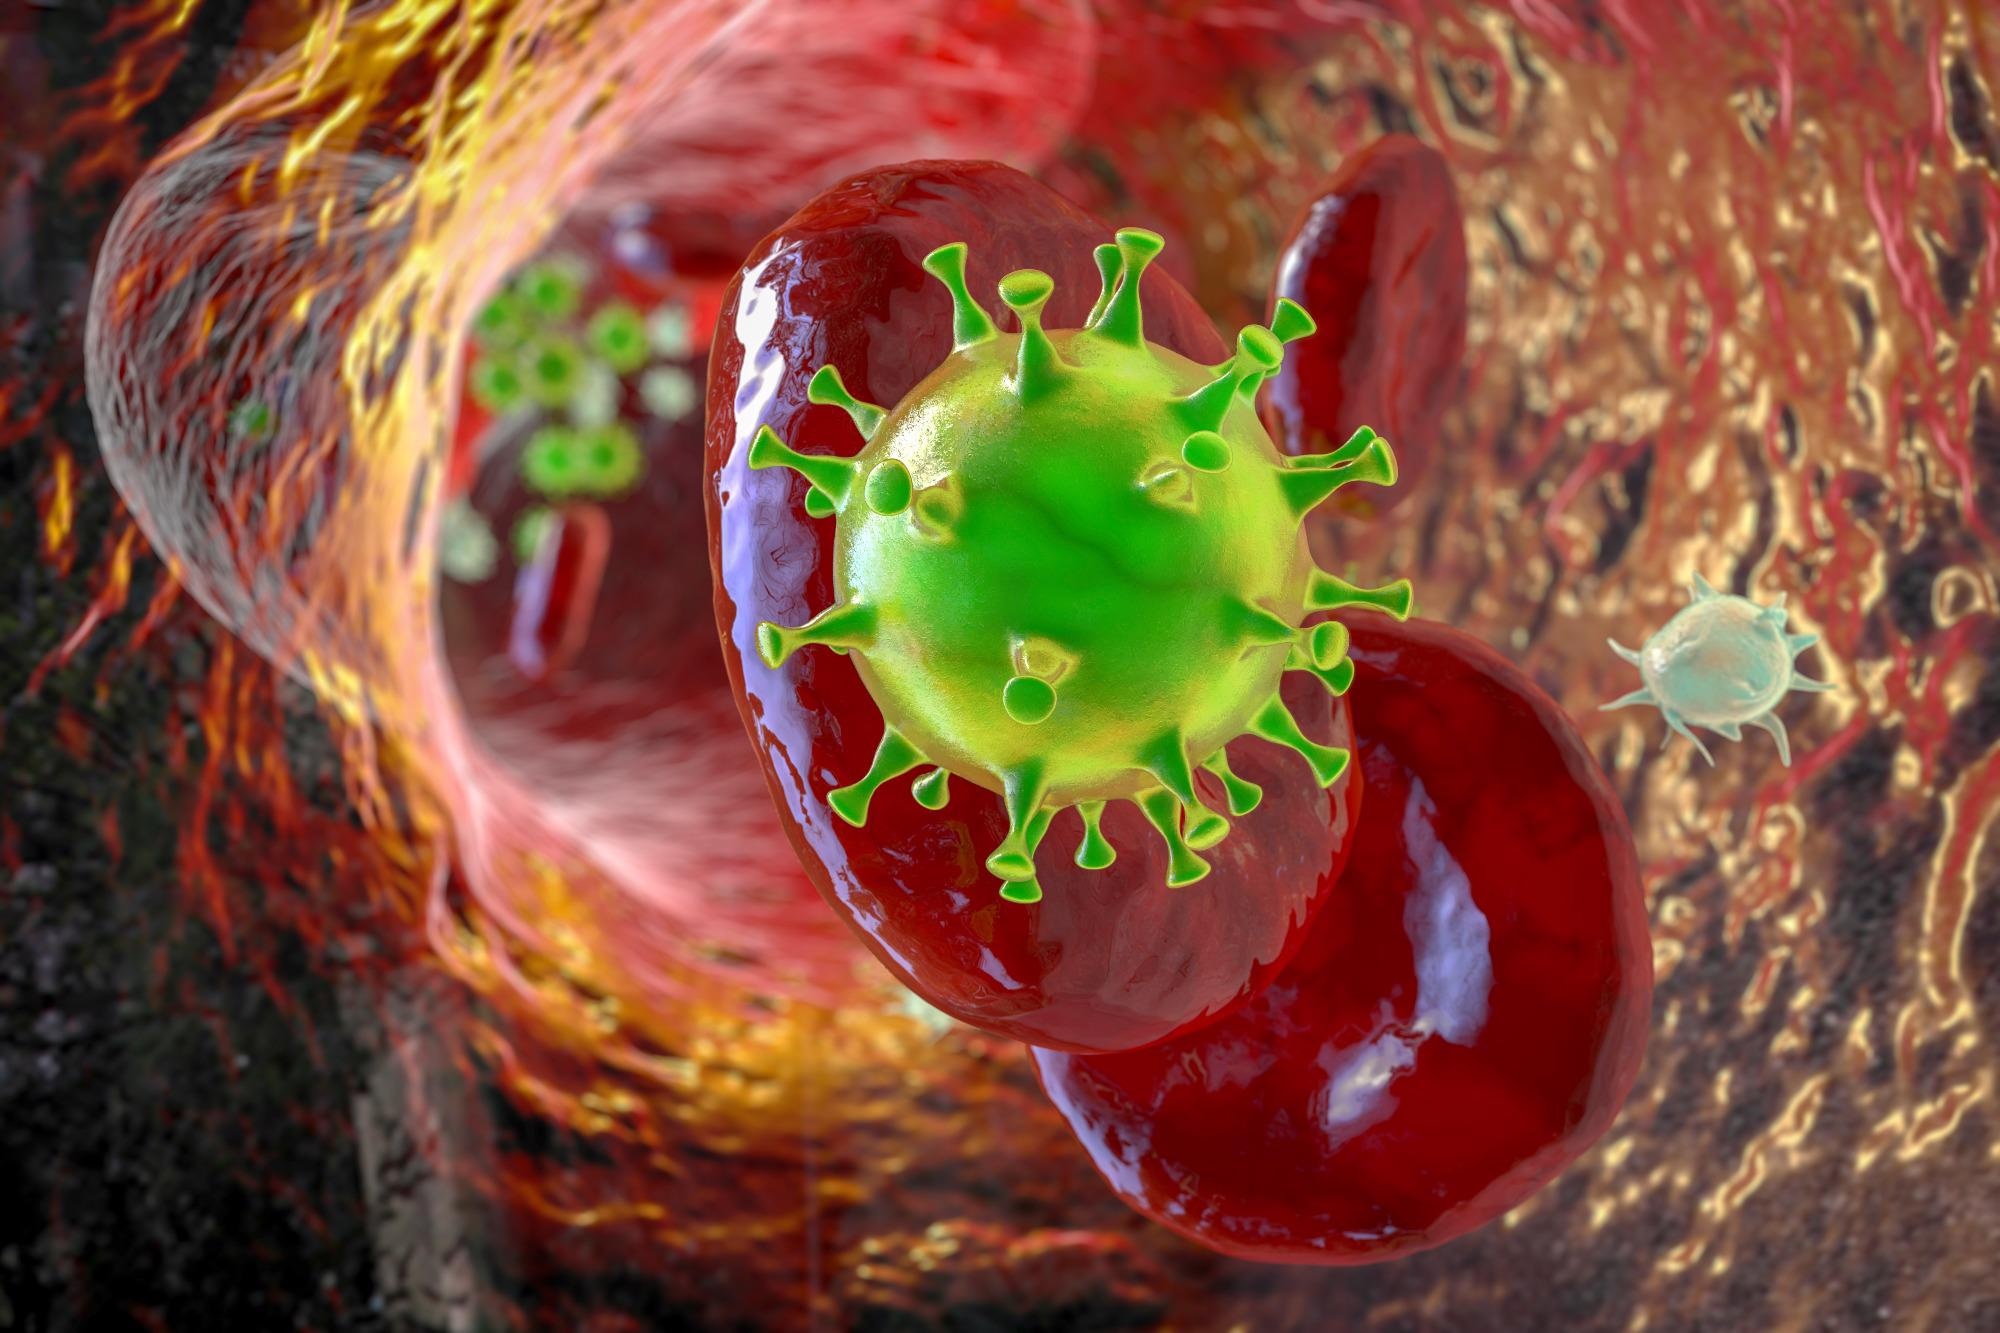 Study: Platelet activation by SARS-CoV-2 implicates the release of active tissue factor by infected cells. Image Credit: Kateryna Kon / Shutterstock